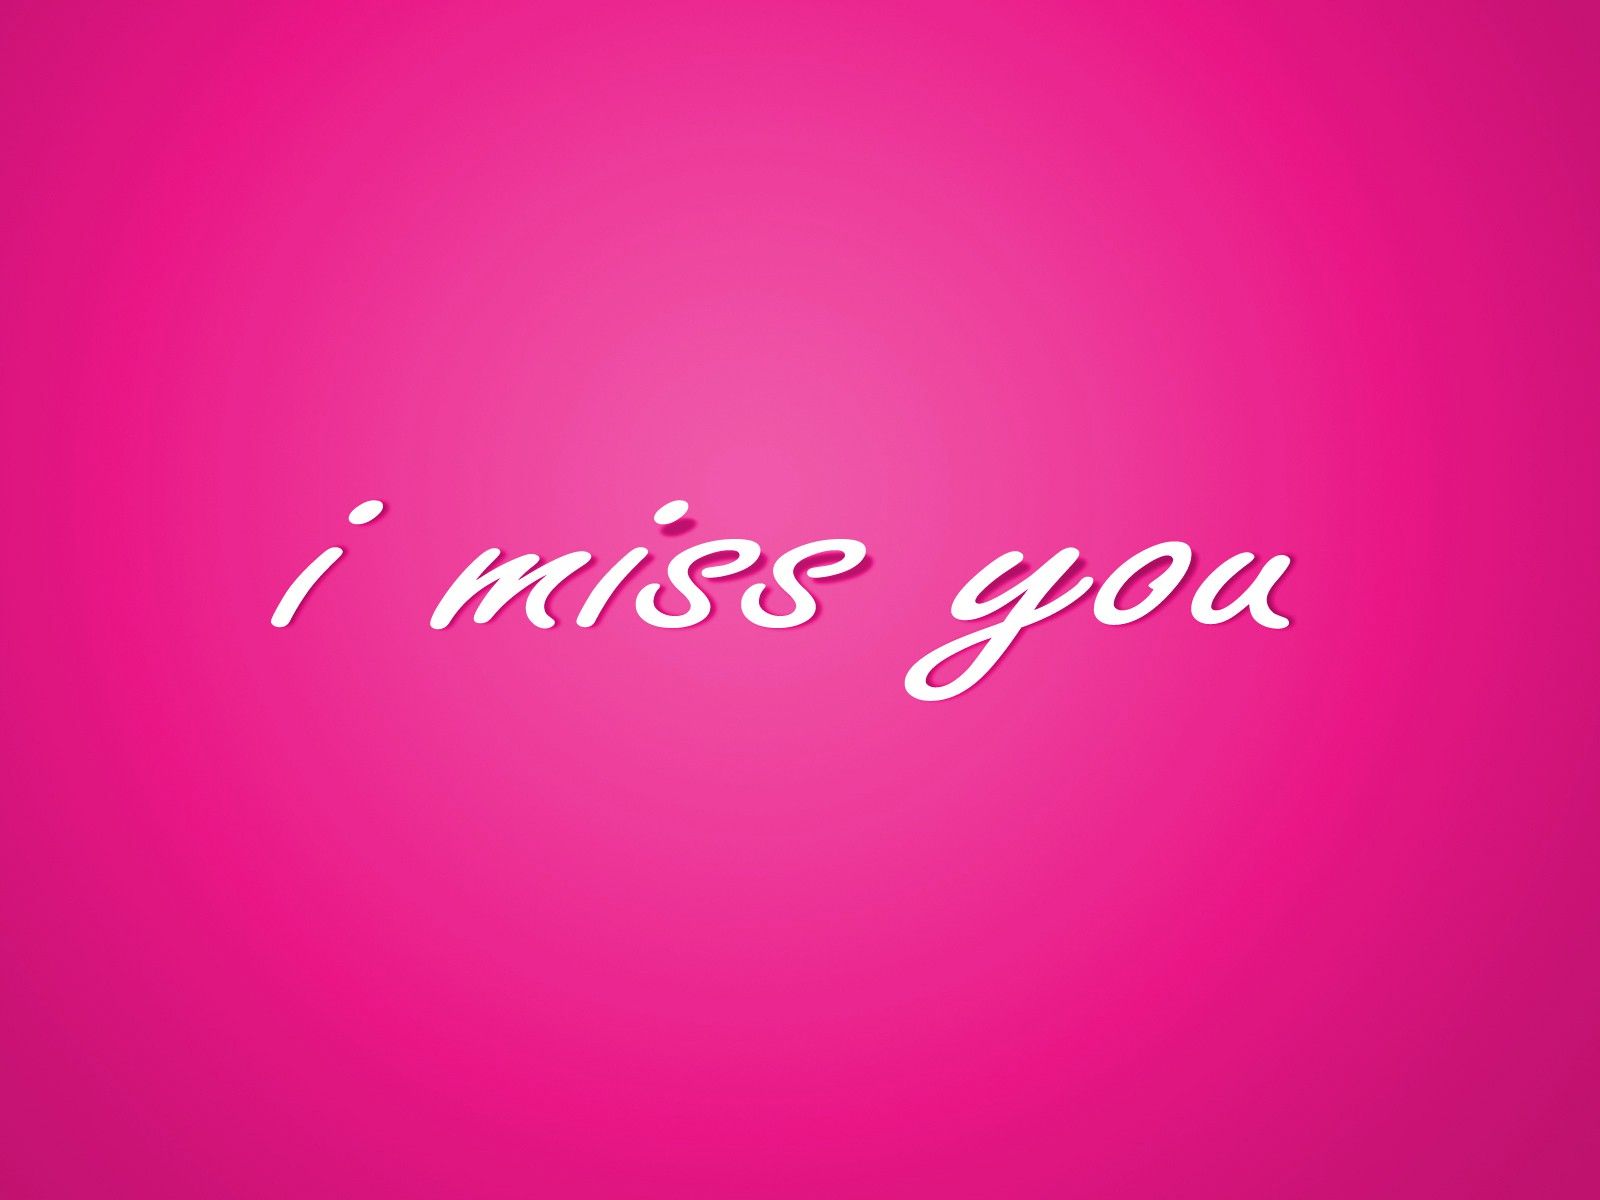 I Miss You HD images pics download free 1080p